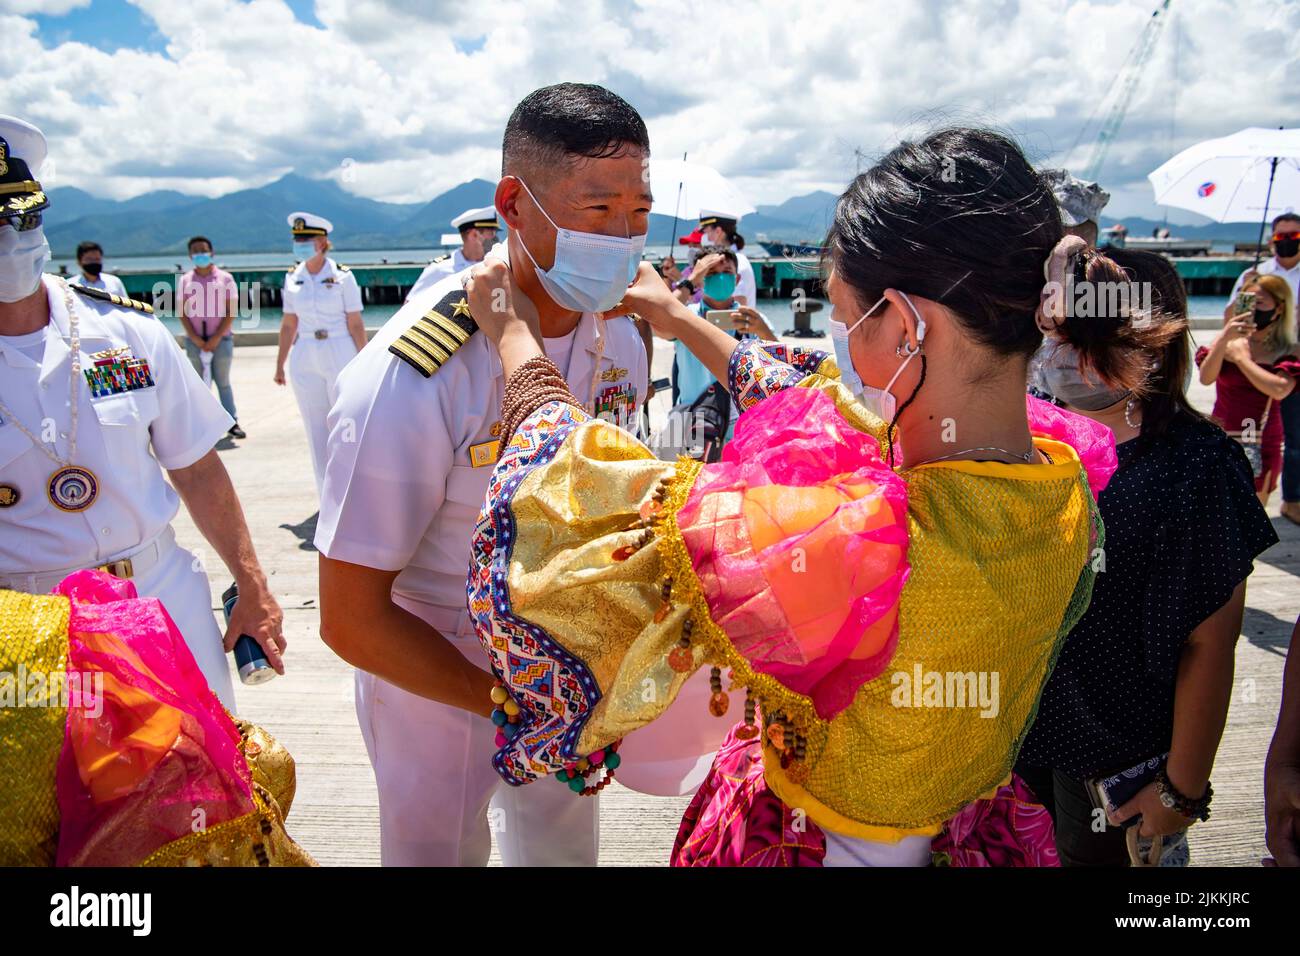 Puerto Princesa, Philippines. 27 July, 2022. U.S. Navy Capt. Hank Kim, Pacific Partnership 2022 mission commander, receives a traditional necklace from a Filipina cultural dancer upon arrival aboard the USNS Mercy during the kickoff of the Pacific Partnership July 27, 2022 in Puerto Princesa, Philippines.  Credit: MC3 Michael Singley/Planetpix/Alamy Live News Stock Photo